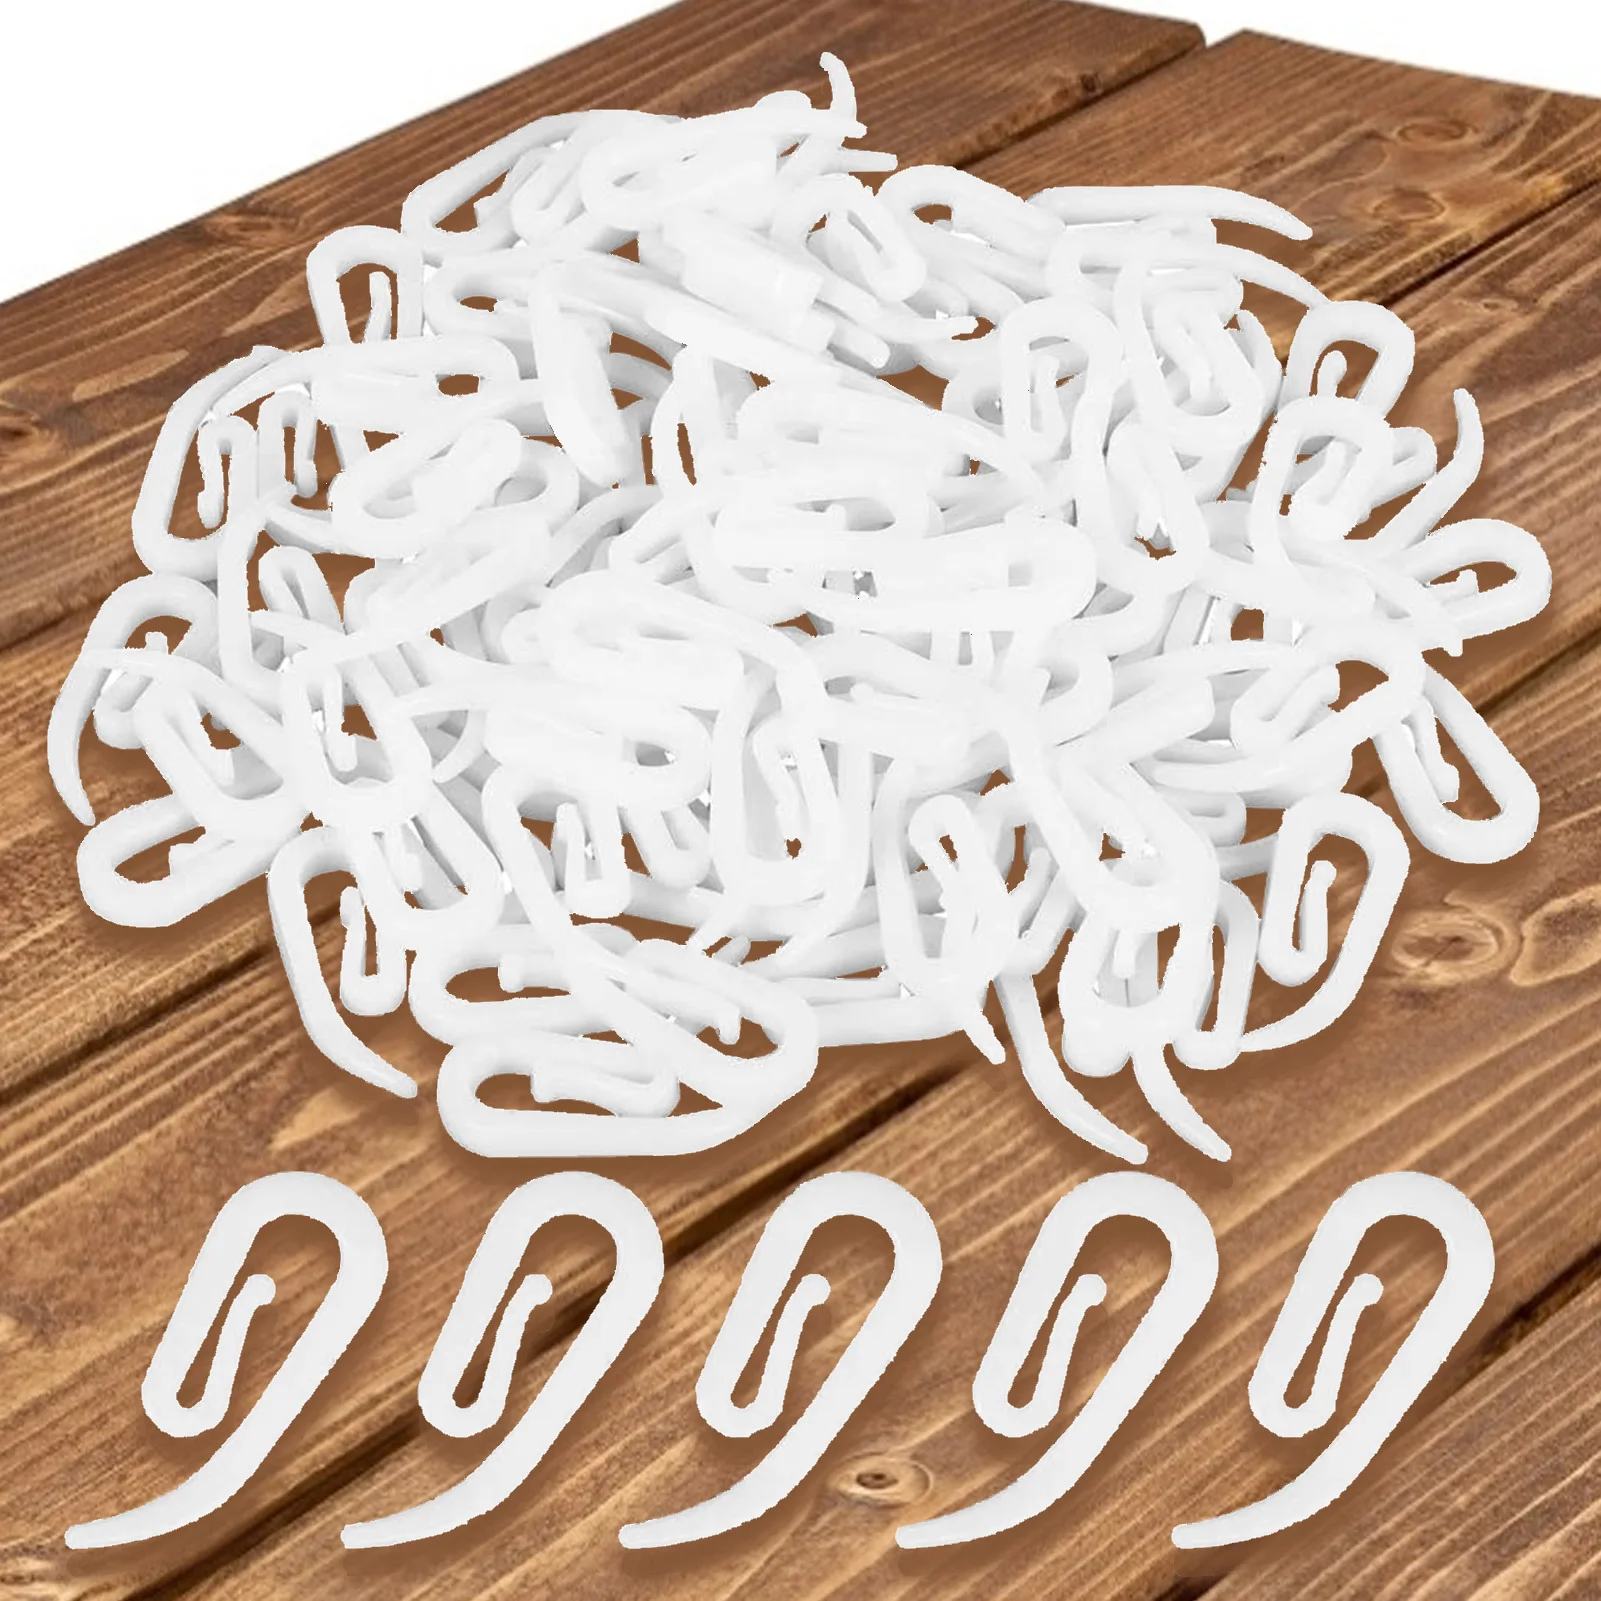 100pcs Curtain Hooks Plastic Drapery Hooks For Shower Curtain Clamps Bath Hook Retro Clothespin Pole Buckle Accessories